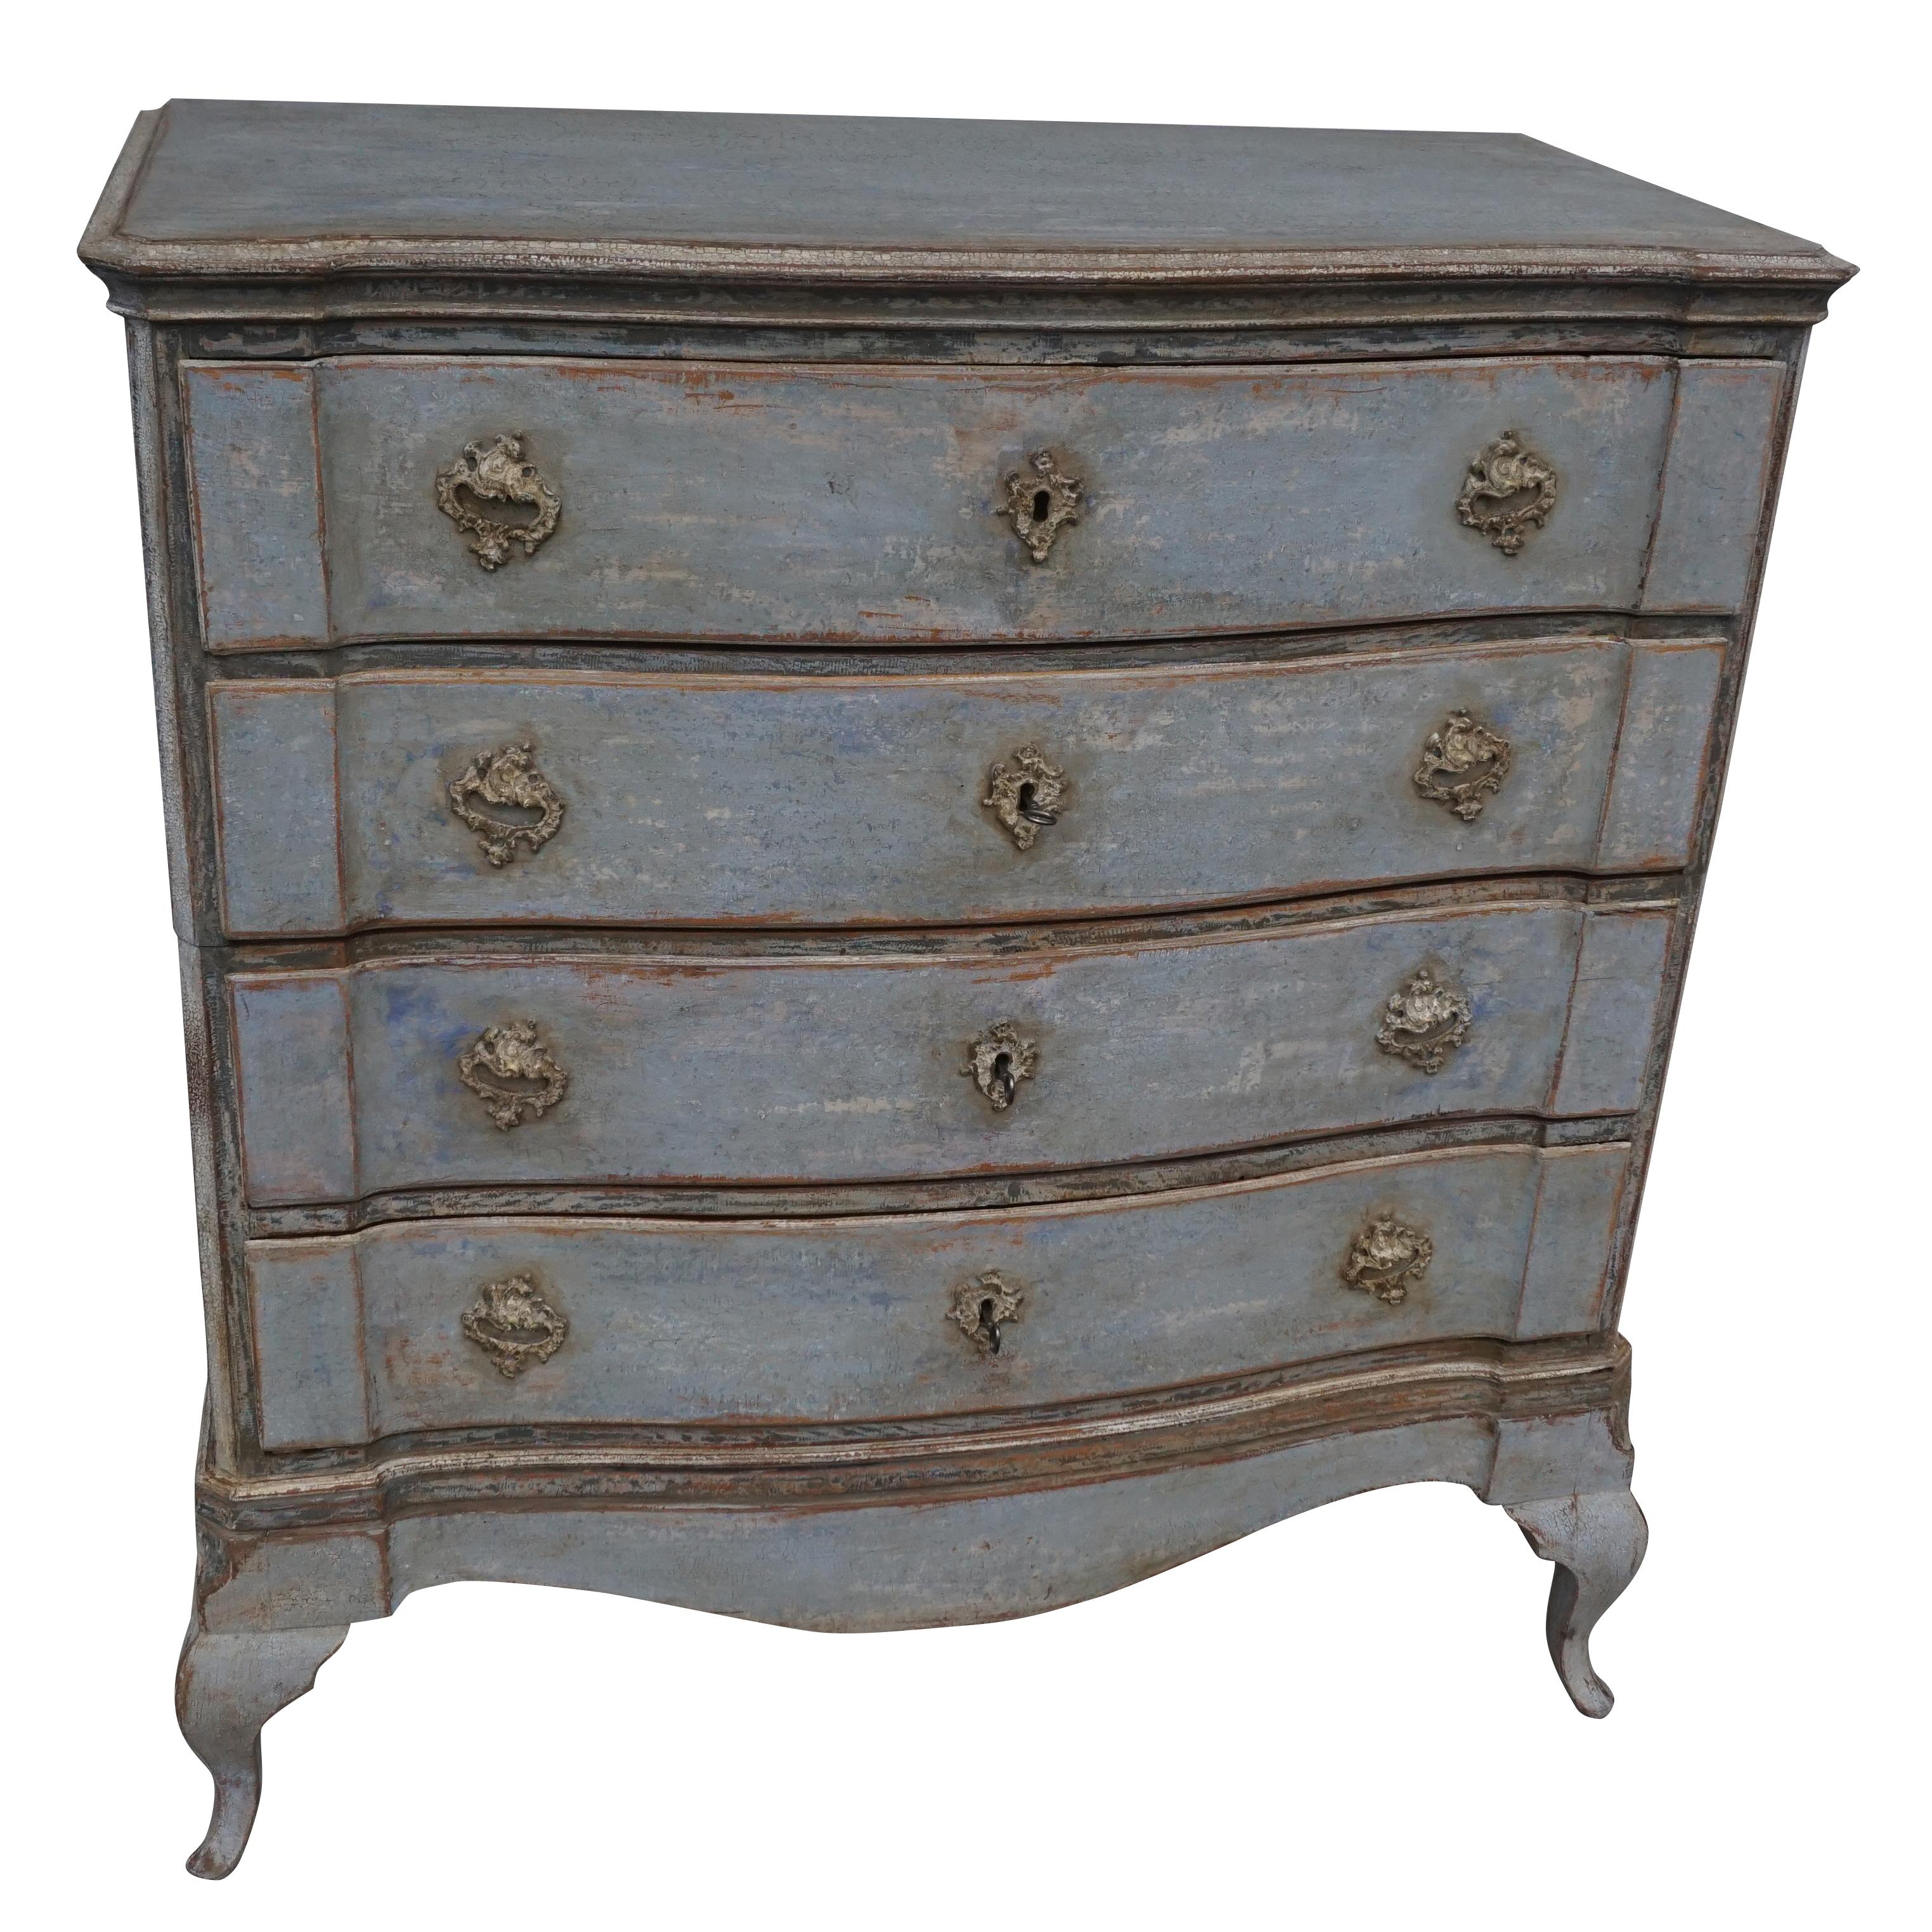 An antique Swedish Gustavian chest of drawers with four drawers and original hardware. The chest has been retouched with a blue grey finish and is made of hand carved oakwood, shaped front lines and brass hardware, in good condition. Wear consistent